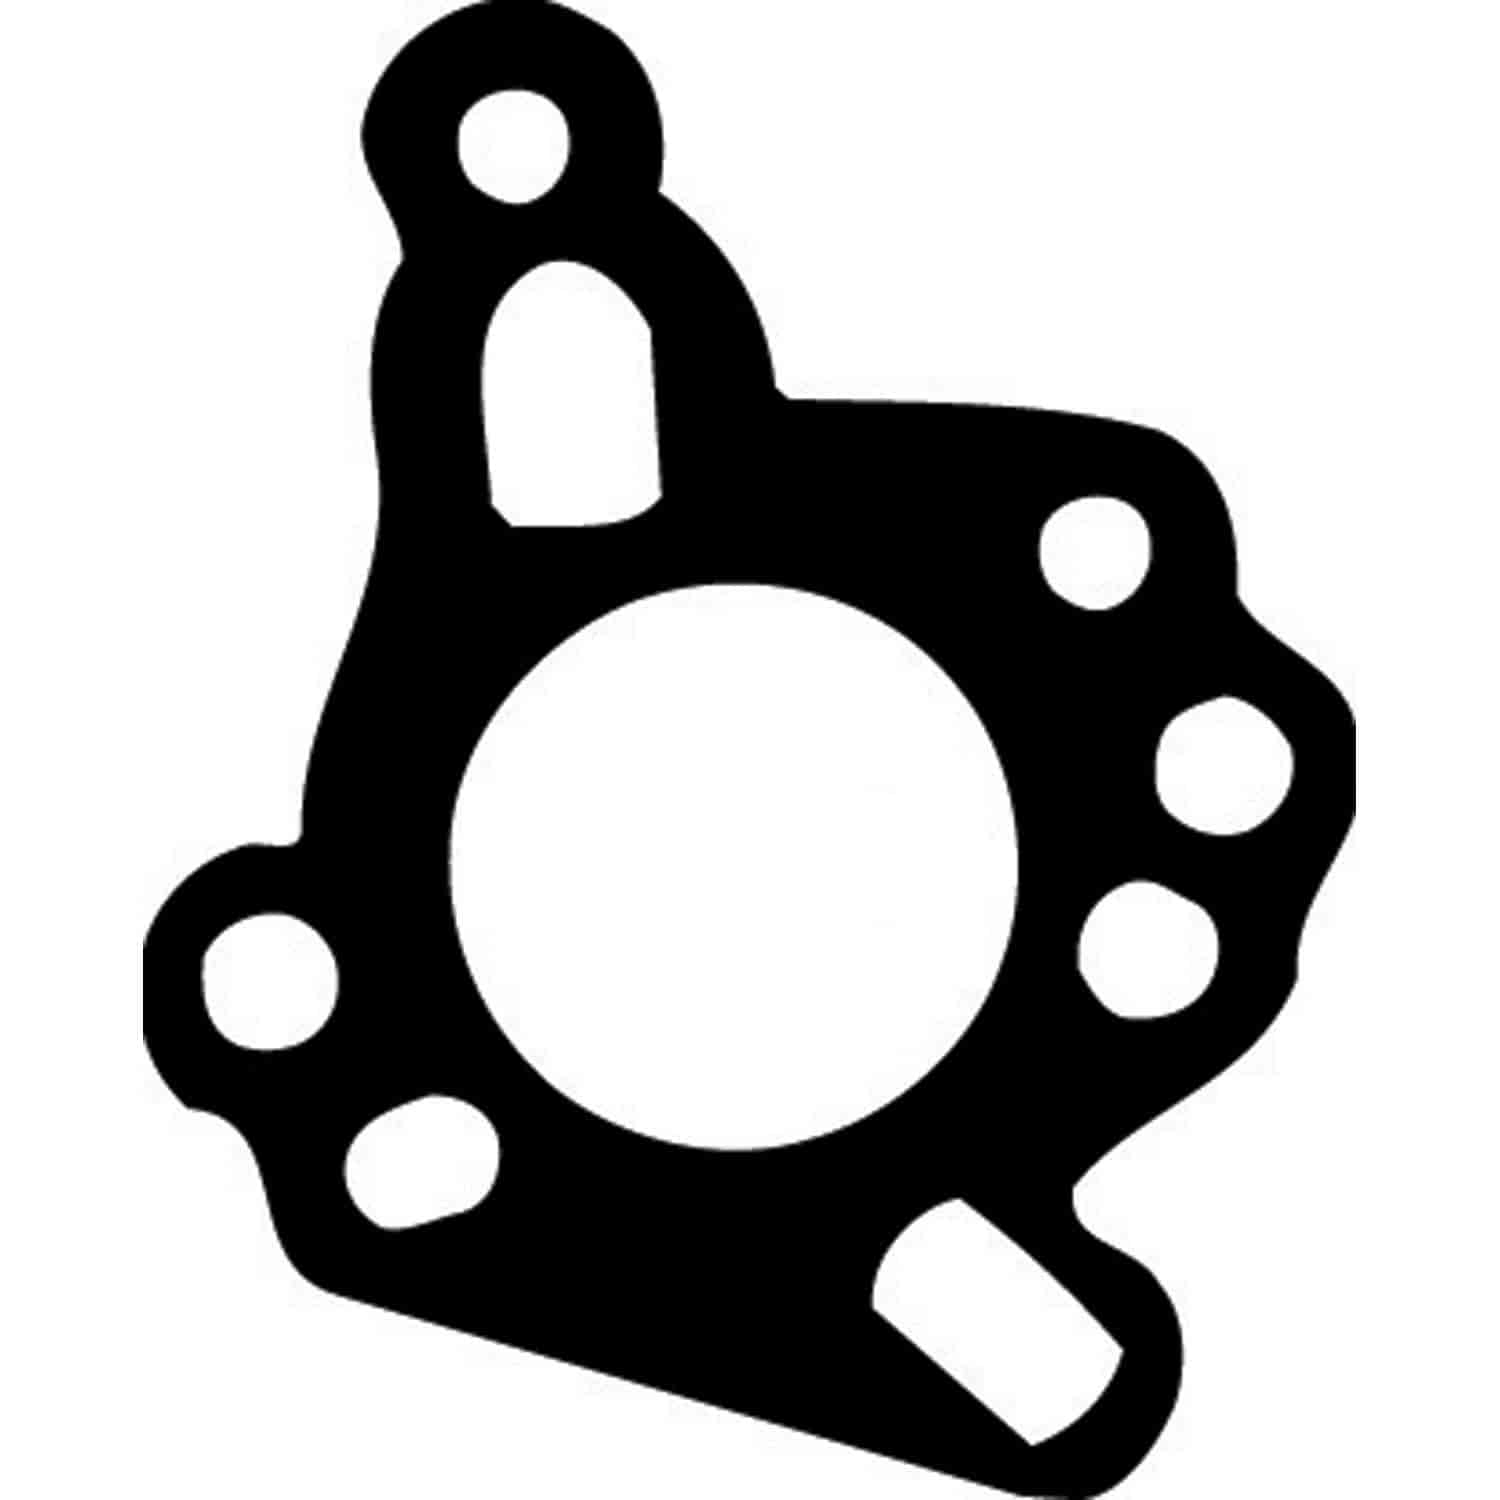 Thermostat Gaskets